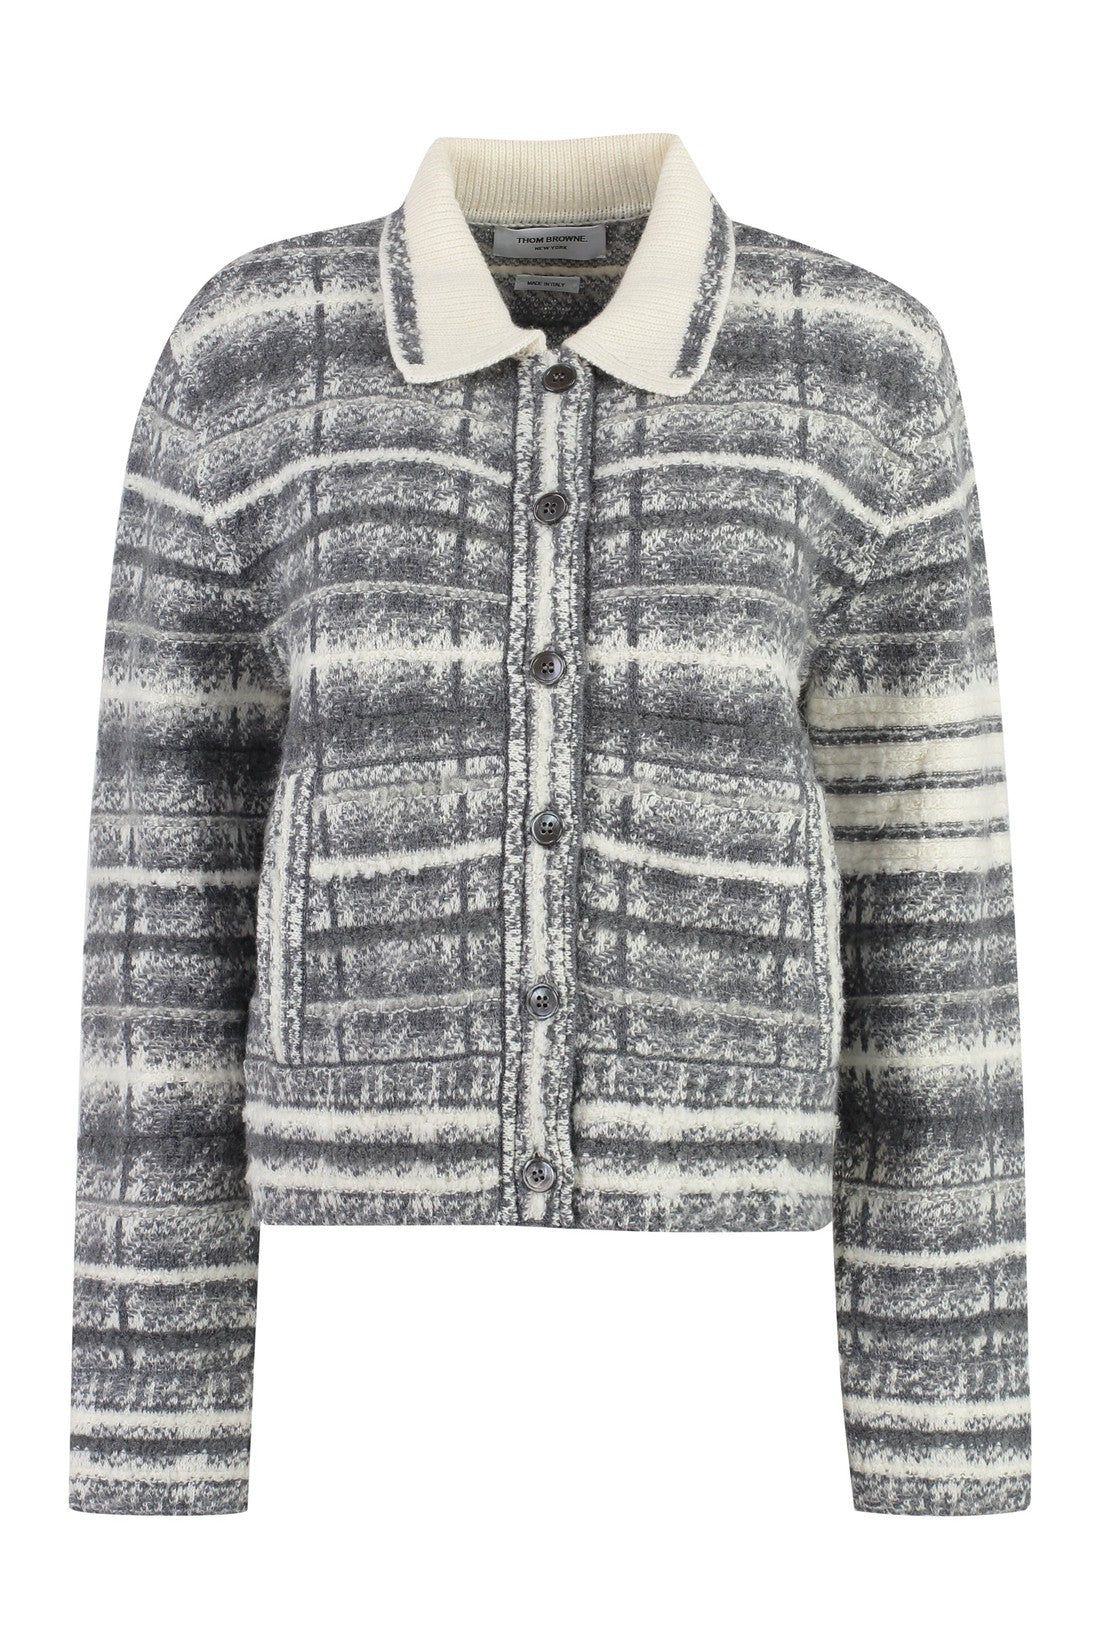 Thom Browne-OUTLET-SALE-Checked wood Jacket-ARCHIVIST